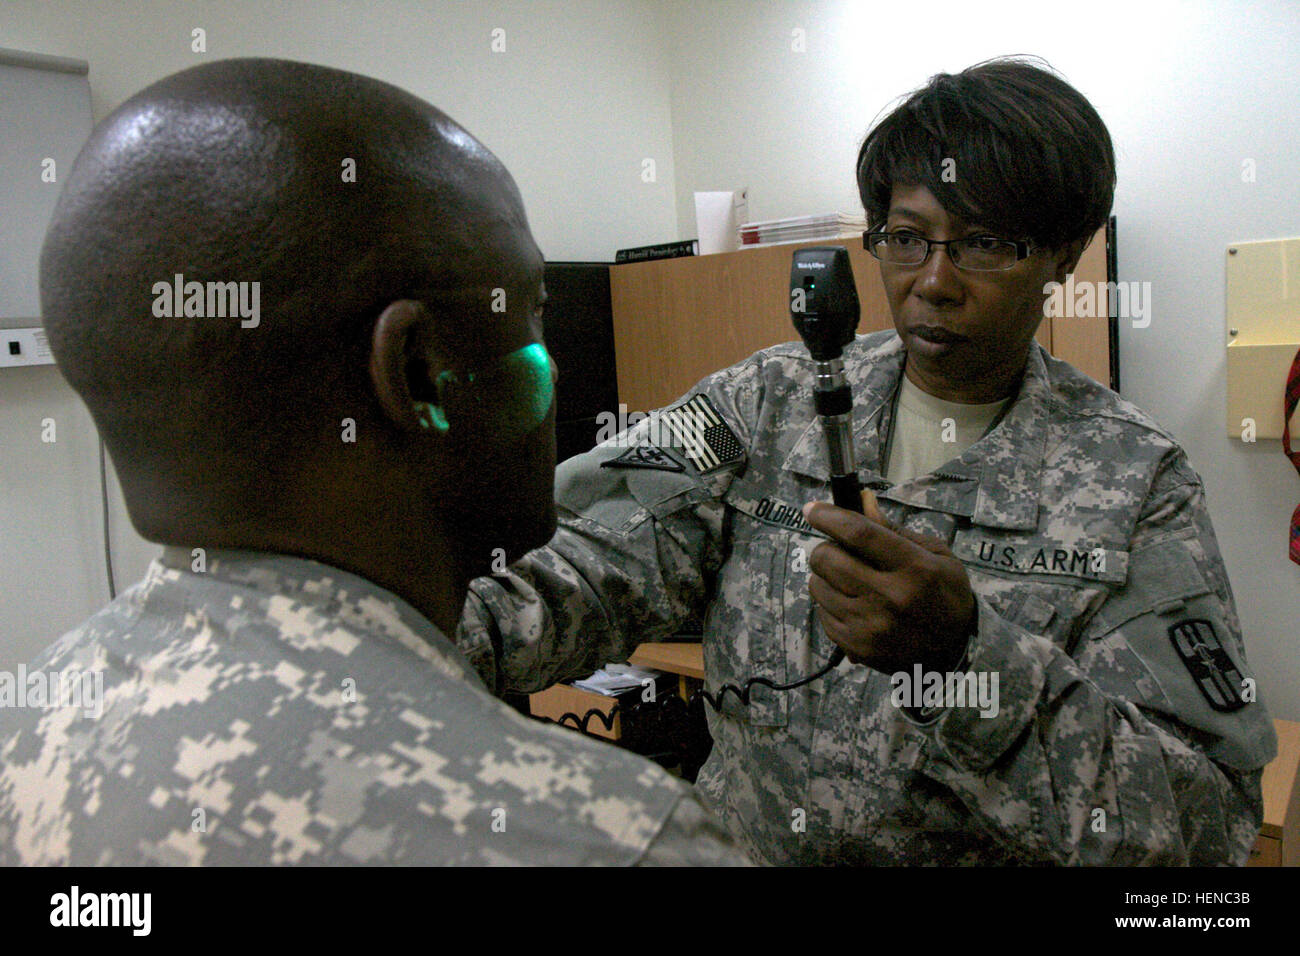 Col. Lorrie Oldham, deputy commander for Clinical Services at Camp Arifjan, Kuwait, with the 452nd Combat Support Hospital (Forward), examines a patient Feb. 24, 2014. Oldham has served in the Army for 30 years and counts her promotion to colonel as one of her life's greatest achievements. (U.S. Army photo by Sgt. Jennifer Spradlin, U.S. Army Central public affairs) In the spotlight, Army colonel leads by example 140224-A-OP586-639 Stock Photo